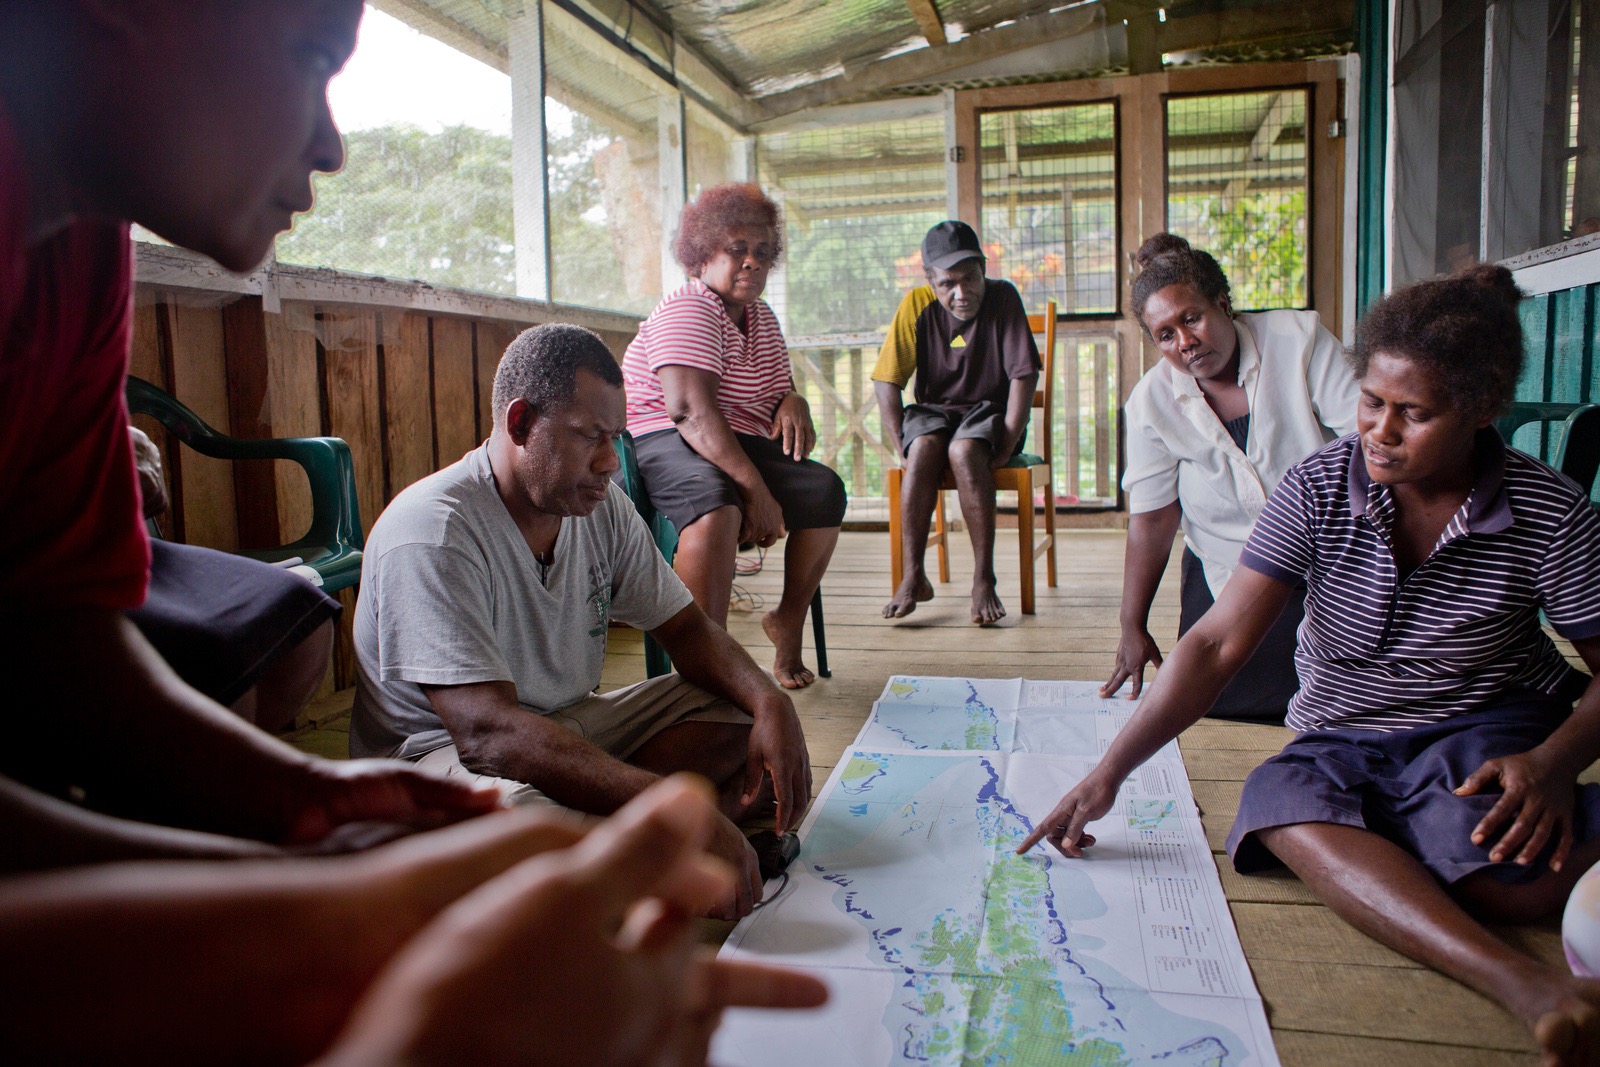 (ALL INTERNAL, LIMITED EXTERNAL RIGHTS) Willie Atu (on left), Project Manager for The Nature Conservancy's Solomon Islands program showing a map of the conserved and threatened areas of the Solomons to the Mothers Union (the Mothers Union is a group of Kia women who have worked with the Conservancy to raise conservation awarness). The Solomon Islands, a remote Pacific archipelago strung southeast of Papua New Guinea, form a double chain of 922 islands covering more than 835,000 square miles of ocean. PHOTO CREDIT: © Bridget Besaw